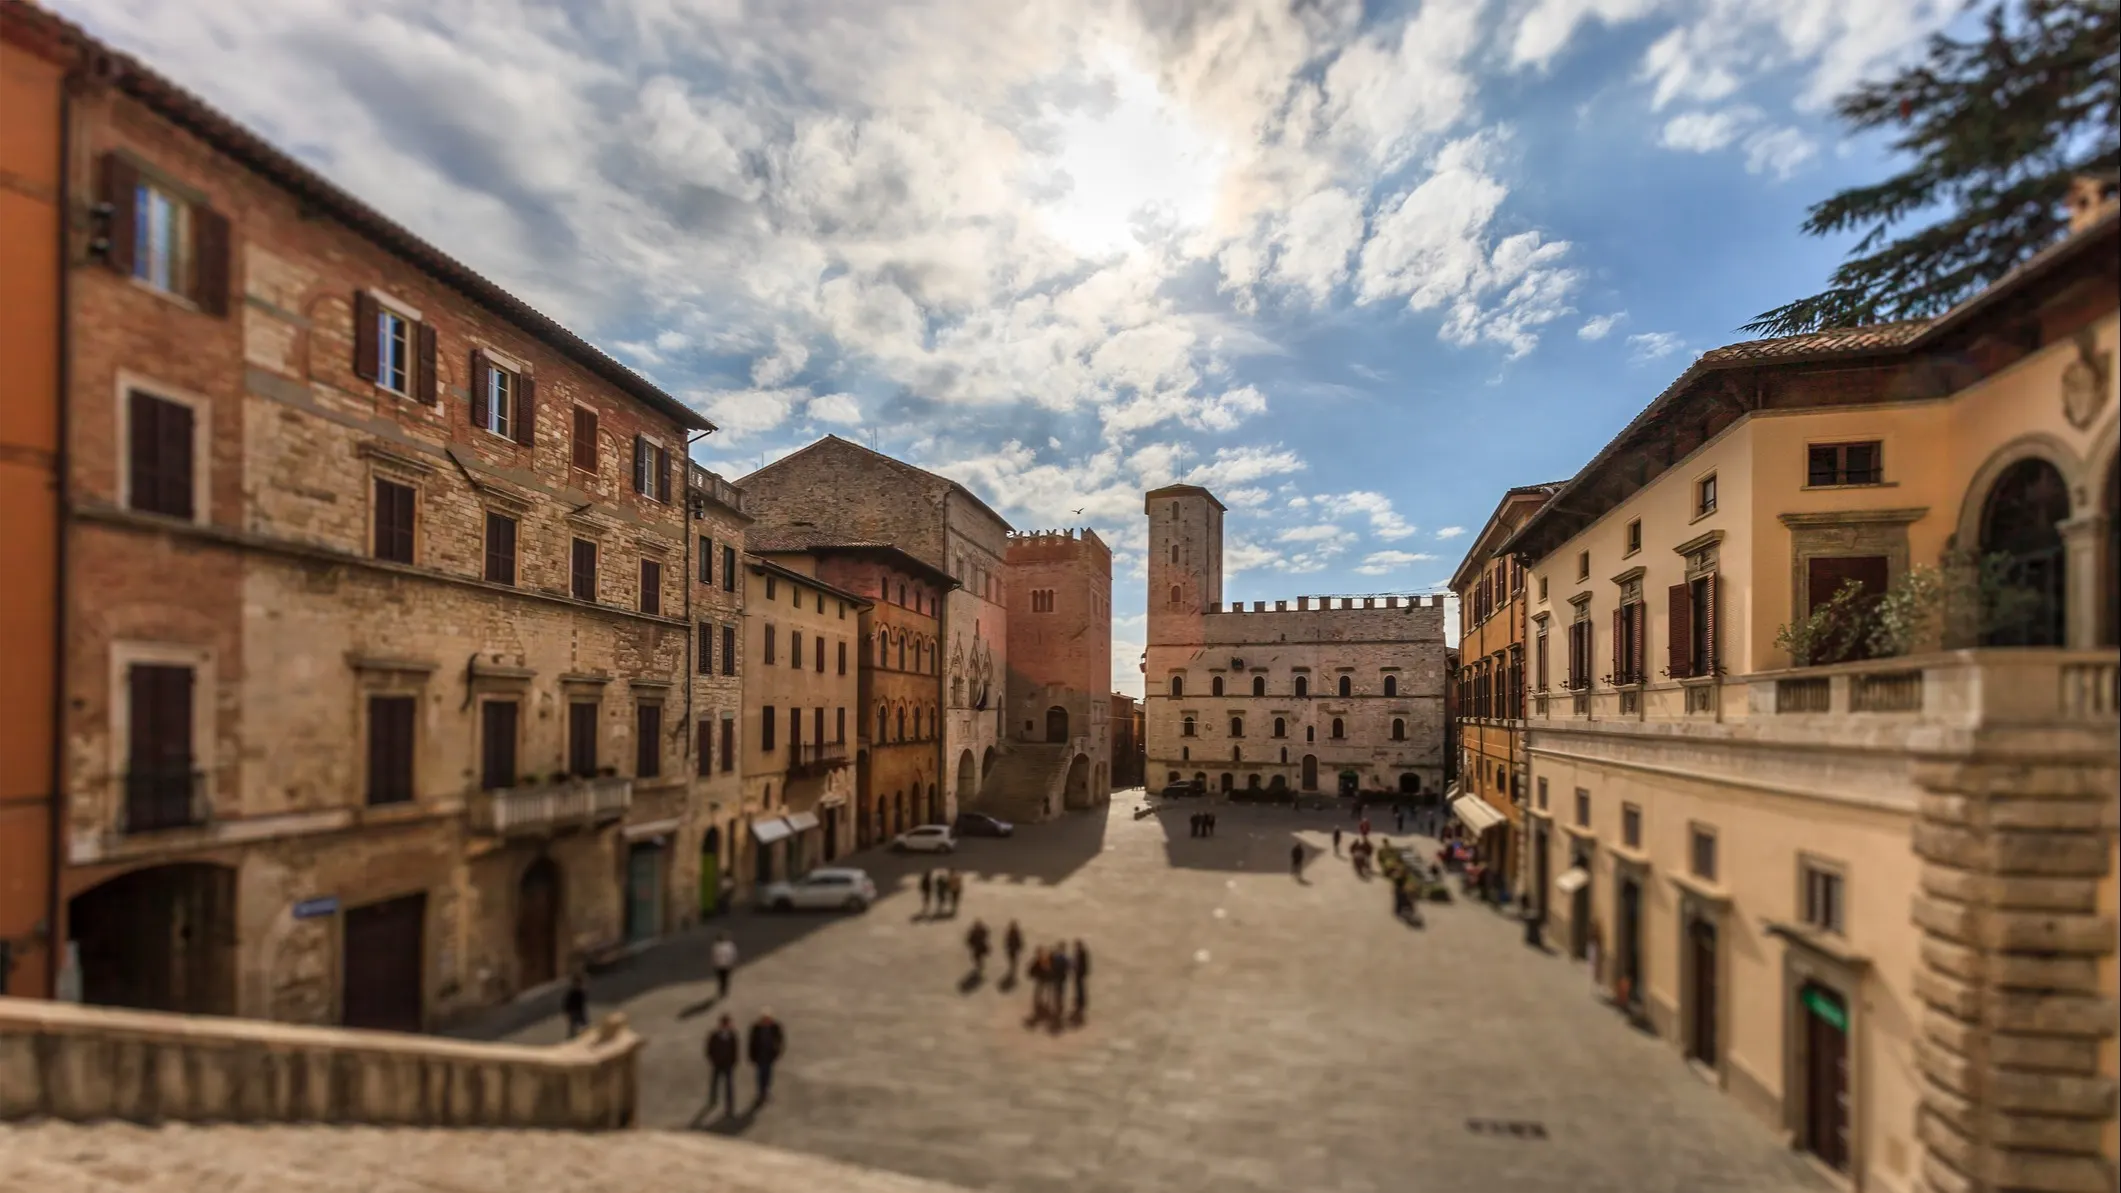 Flanked by churches, Todi’s medieval square is one of the oldest—and most beautiful—in Italy.